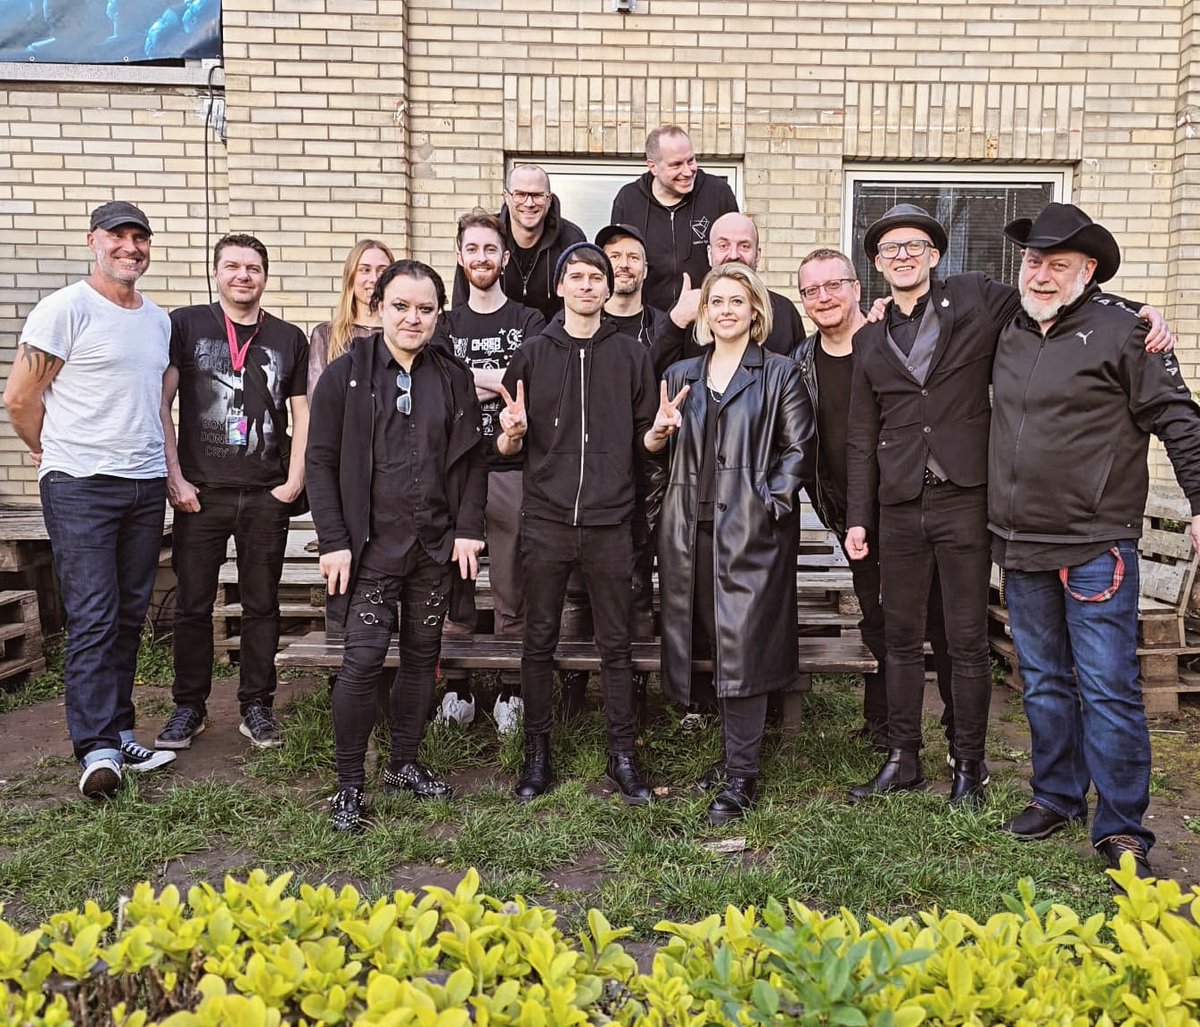 <i> Highly Emotional End Of Tour Photo With Our Friends from #EmpathyTest @empathytest @IsaacHowlett @Lakeside_X @pluswelt @amarcuscarter. Next stop for #AUGER is America at @darkforcefest! ;-) #TeamAuger #AugerMiners <i>